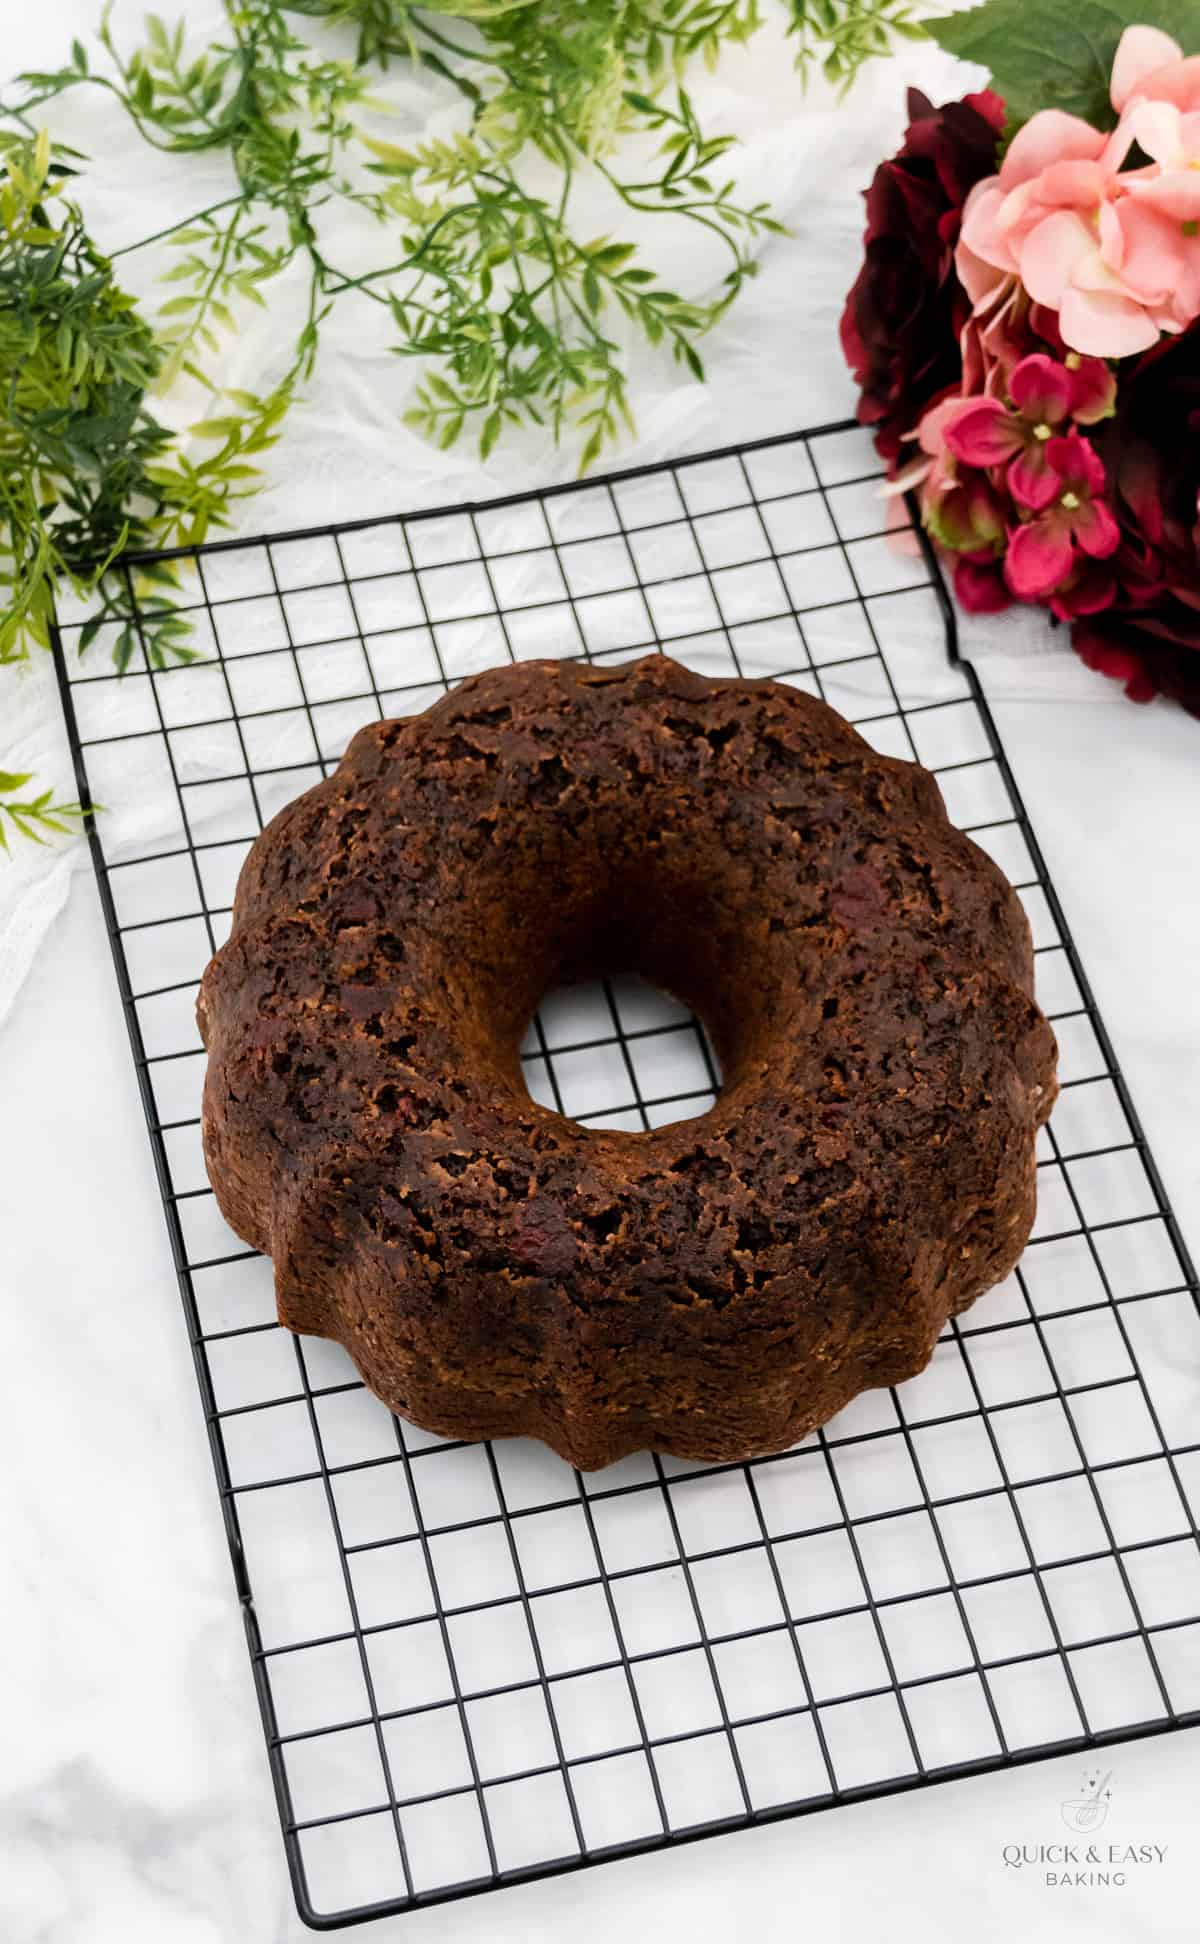 Large bundt cake with cherries cooling on a rack.